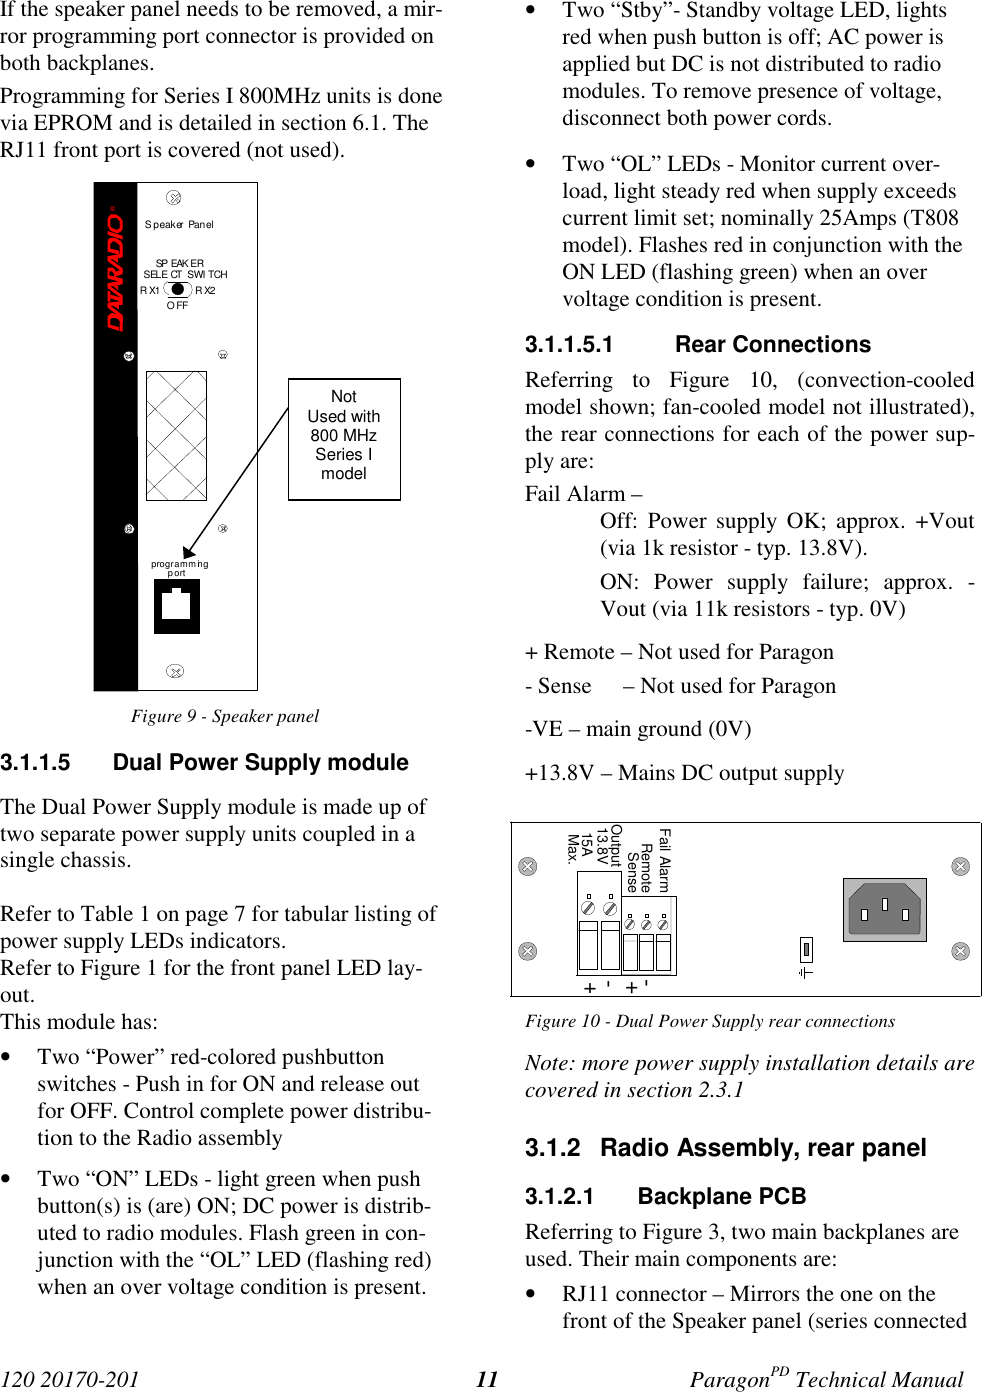 120 20170-201 ParagonPD Technical Manual11If the speaker panel needs to be removed, a mir-ror programming port connector is provided onboth backplanes.Programming for Series I 800MHz units is donevia EPROM and is detailed in section 6.1. TheRJ11 front port is covered (not used).Figure 9 - Speaker panel3.1.1.5  Dual Power Supply moduleThe Dual Power Supply module is made up oftwo separate power supply units coupled in asingle chassis.Refer to Table 1 on page 7 for tabular listing ofpower supply LEDs indicators.Refer to Figure 1 for the front panel LED lay-out.This module has:• Two “Power” red-colored pushbuttonswitches - Push in for ON and release outfor OFF. Control complete power distribu-tion to the Radio assembly• Two “ON” LEDs - light green when pushbutton(s) is (are) ON; DC power is distrib-uted to radio modules. Flash green in con-junction with the “OL” LED (flashing red)when an over voltage condition is present.• Two “Stby”- Standby voltage LED, lightsred when push button is off; AC power isapplied but DC is not distributed to radiomodules. To remove presence of voltage,disconnect both power cords.• Two “OL” LEDs - Monitor current over-load, light steady red when supply exceedscurrent limit set; nominally 25Amps (T808model). Flashes red in conjunction with theON LED (flashing green) when an overvoltage condition is present.3.1.1.5.1 Rear ConnectionsReferring to Figure 10, (convection-cooledmodel shown; fan-cooled model not illustrated),the rear connections for each of the power sup-ply are:Fail Alarm –Off: Power supply OK; approx. +Vout(via 1k resistor - typ. 13.8V).ON: Power supply failure; approx. -Vout (via 11k resistors - typ. 0V)+ Remote – Not used for Paragon- Sense     – Not used for Paragon-VE – main ground (0V)+13.8V – Mains DC output supplyFigure 10 - Dual Power Supply rear connectionsNote: more power supply installation details arecovered in section 2.3.13.1.2  Radio Assembly, rear panel3.1.2.1 Backplane PCBReferring to Figure 3, two main backplanes areused. Their main components are:• RJ11 connector – Mirrors the one on thefront of the Speaker panel (series connected®S peaker  Panelprogramm ingportRX2RX1OFFSP EAK ERSELE CT  SWI TCHNotUsed with800 MHzSeries Imodel15A+-OutputSense+-RemoteFail Alarm13.8VMax.